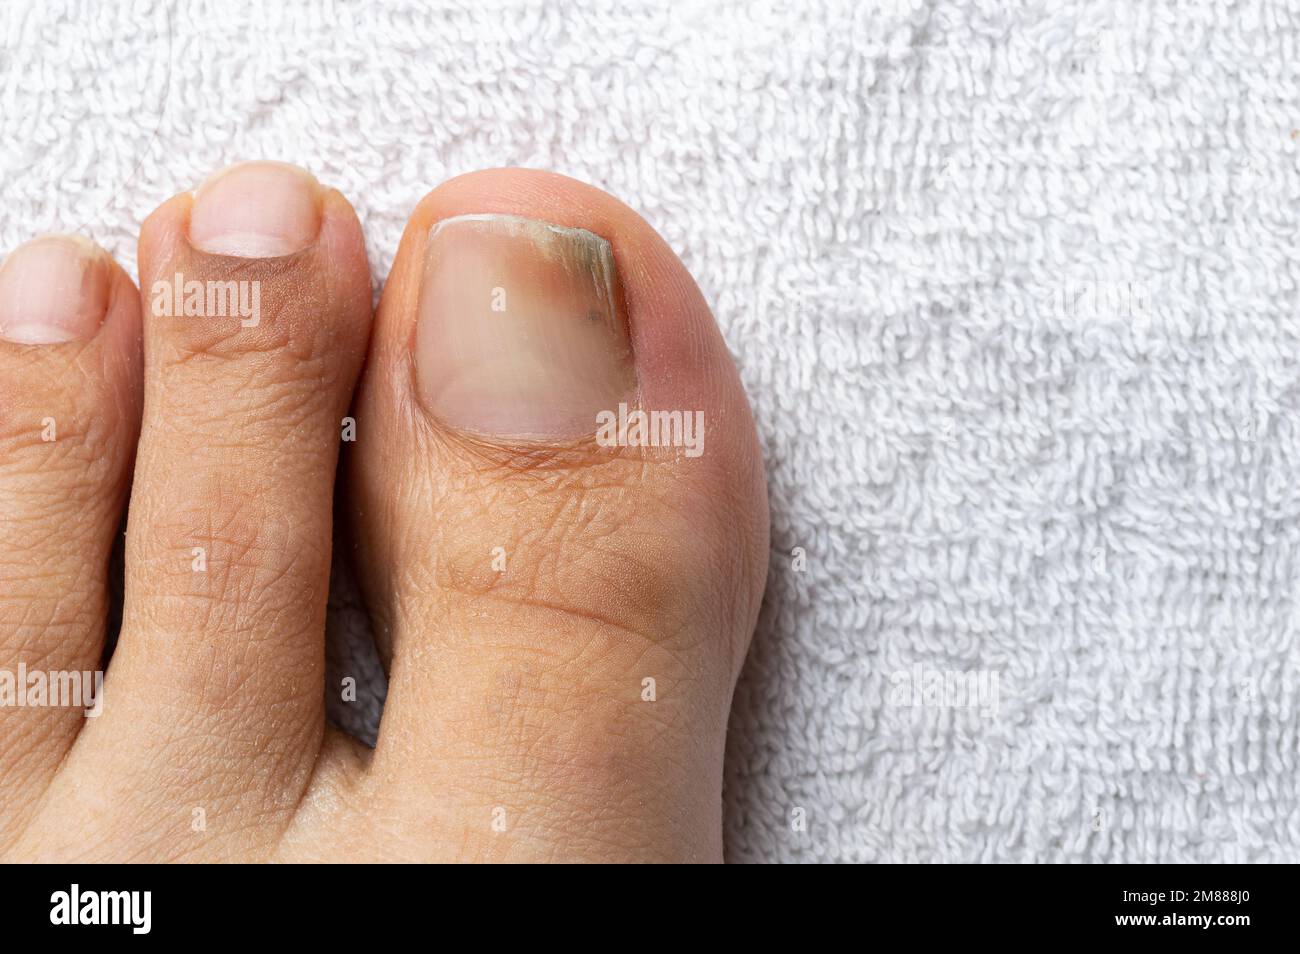 High angle shot of finger with nail fungus infection on a white towel Stock Photo